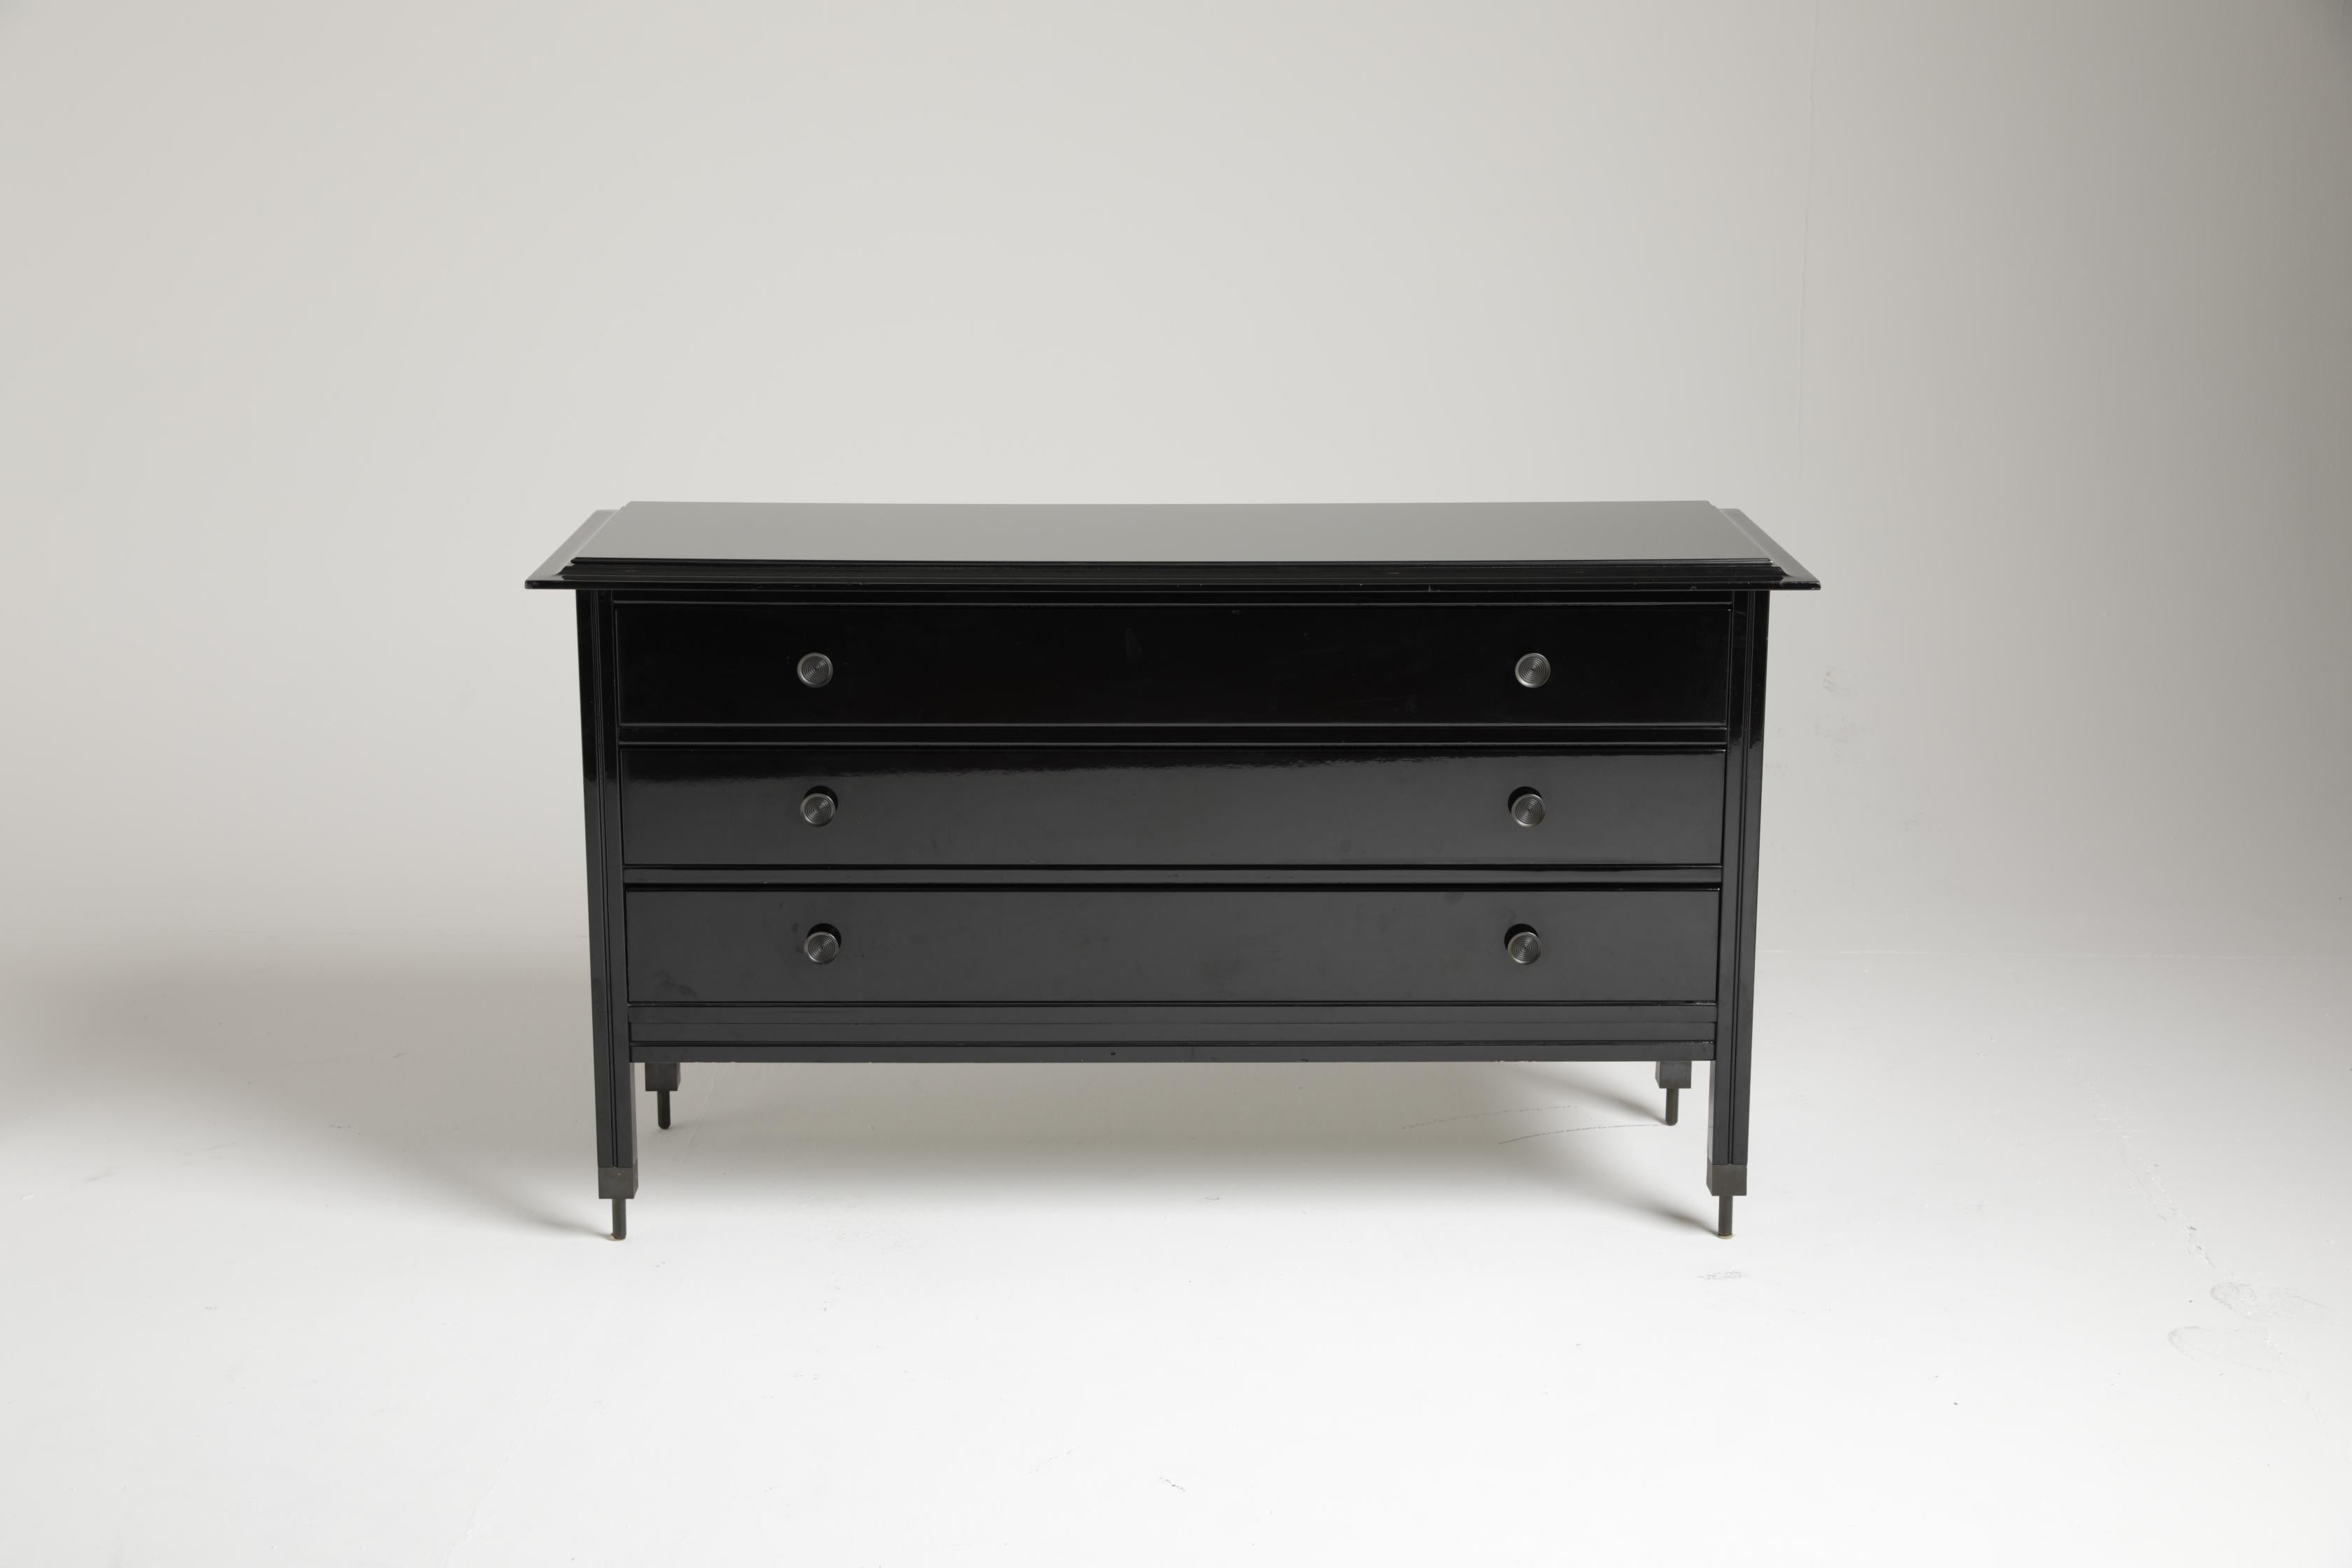 Carlo de Carli Chest of Drawers D154 in Lacquered wood, Sormani, Italy 1963 For Sale 4